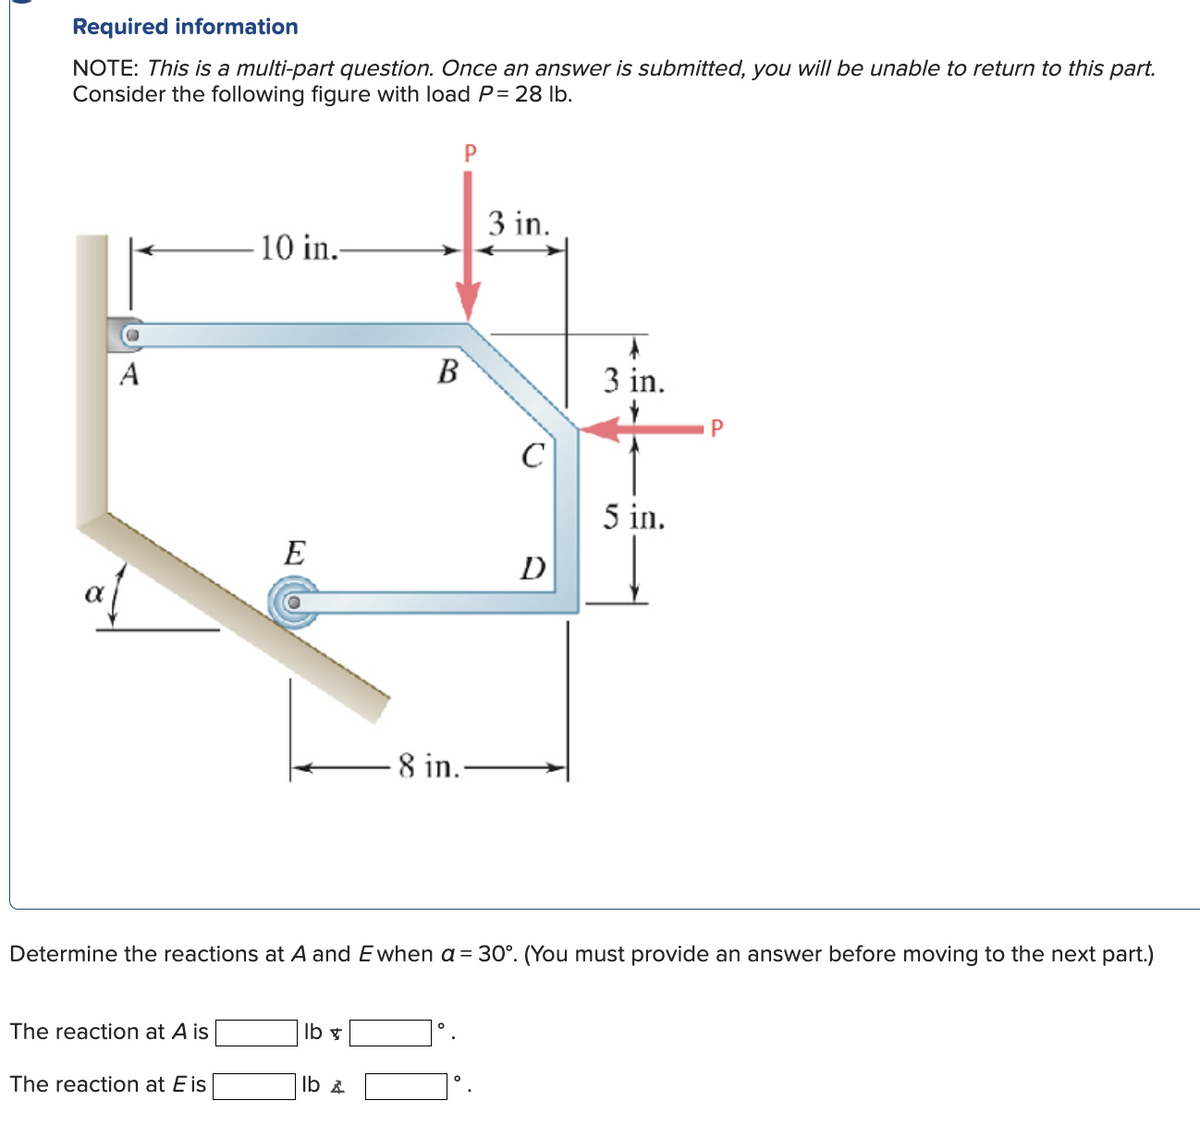 Required information
NOTE: This is a multi-part question. Once an answer is submitted, you will be unable to return to this part.
Consider the following figure with load P = 28 lb.
P
A
The reaction at A is
10 in.-
The reaction at Eis
E
lb x
B
lb &
-8 in..
3 in.
C
D
Determine the reactions at A and Ewhen a = 30°. (You must provide an answer before moving to the next part.)
A
3 in.
5 in.
P